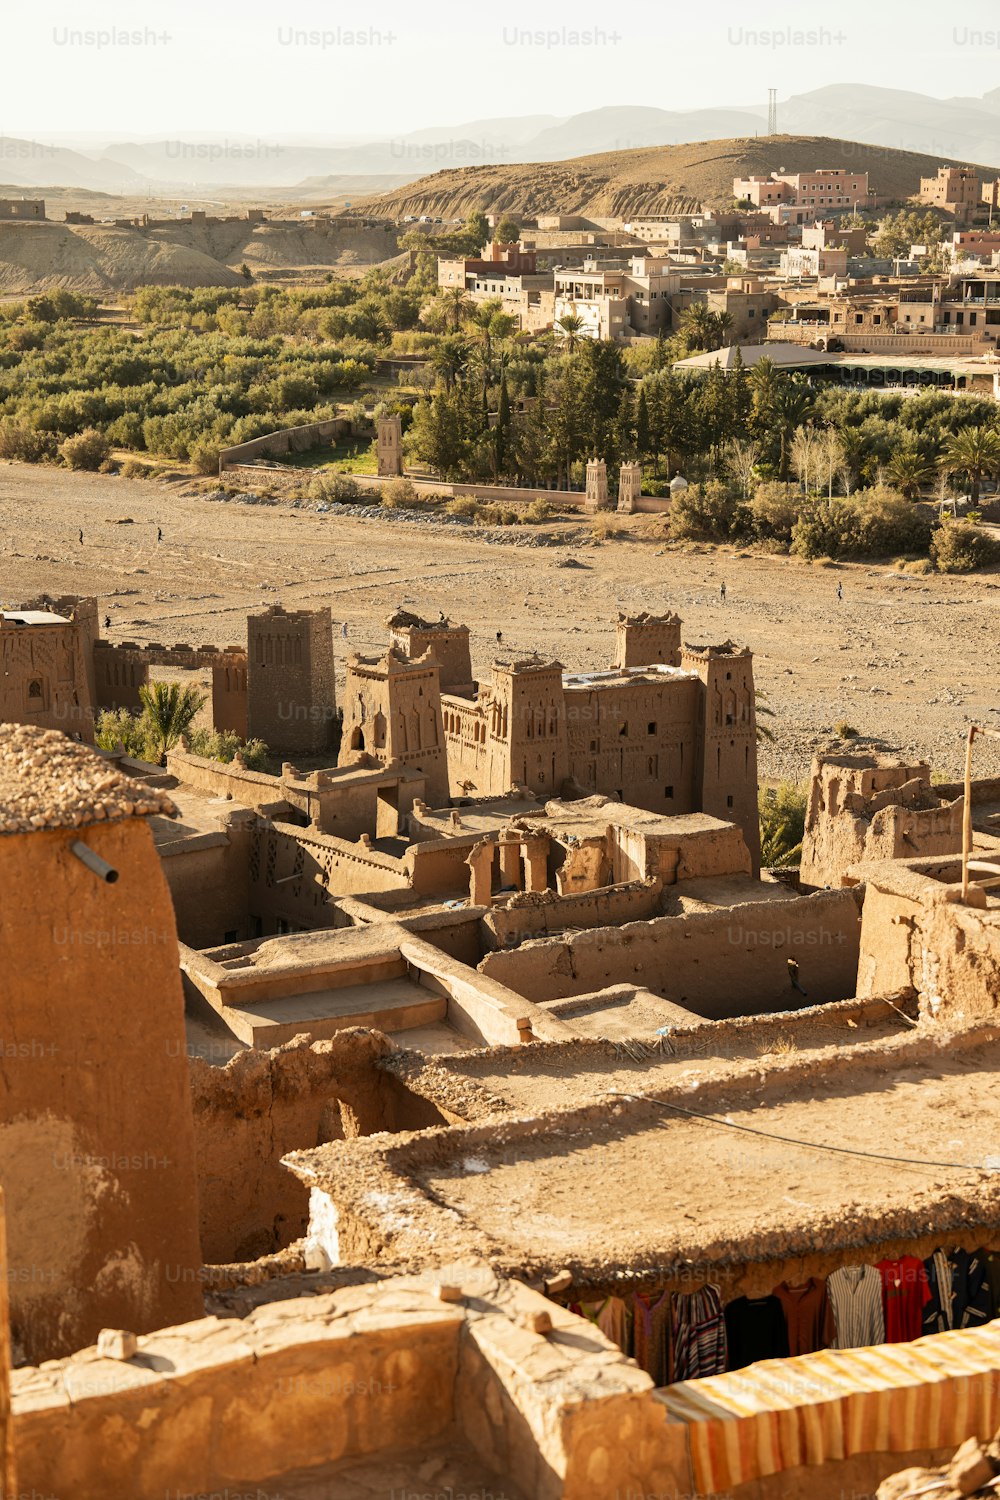 a view of a village in the desert